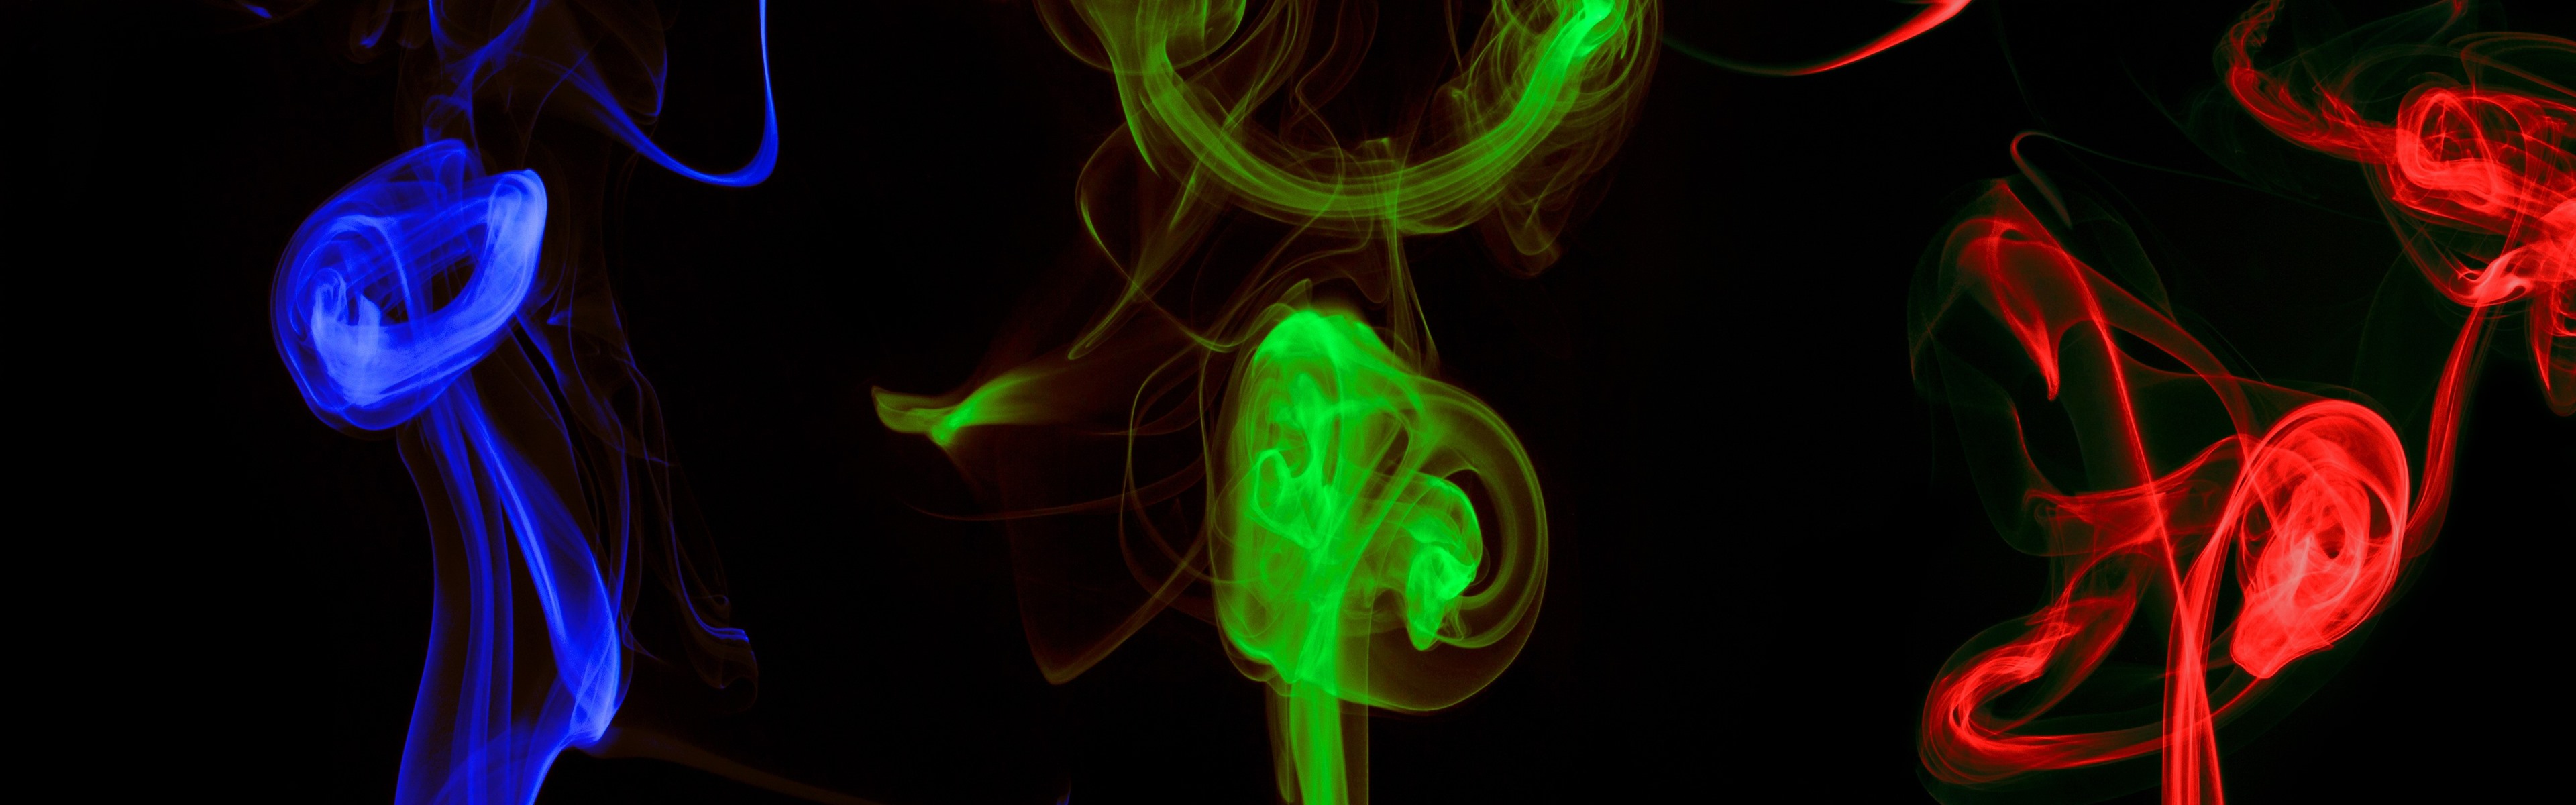 Wallpaper Colorful smoke, blue, green, red 5120x2880 UHD 5K Picture, Image